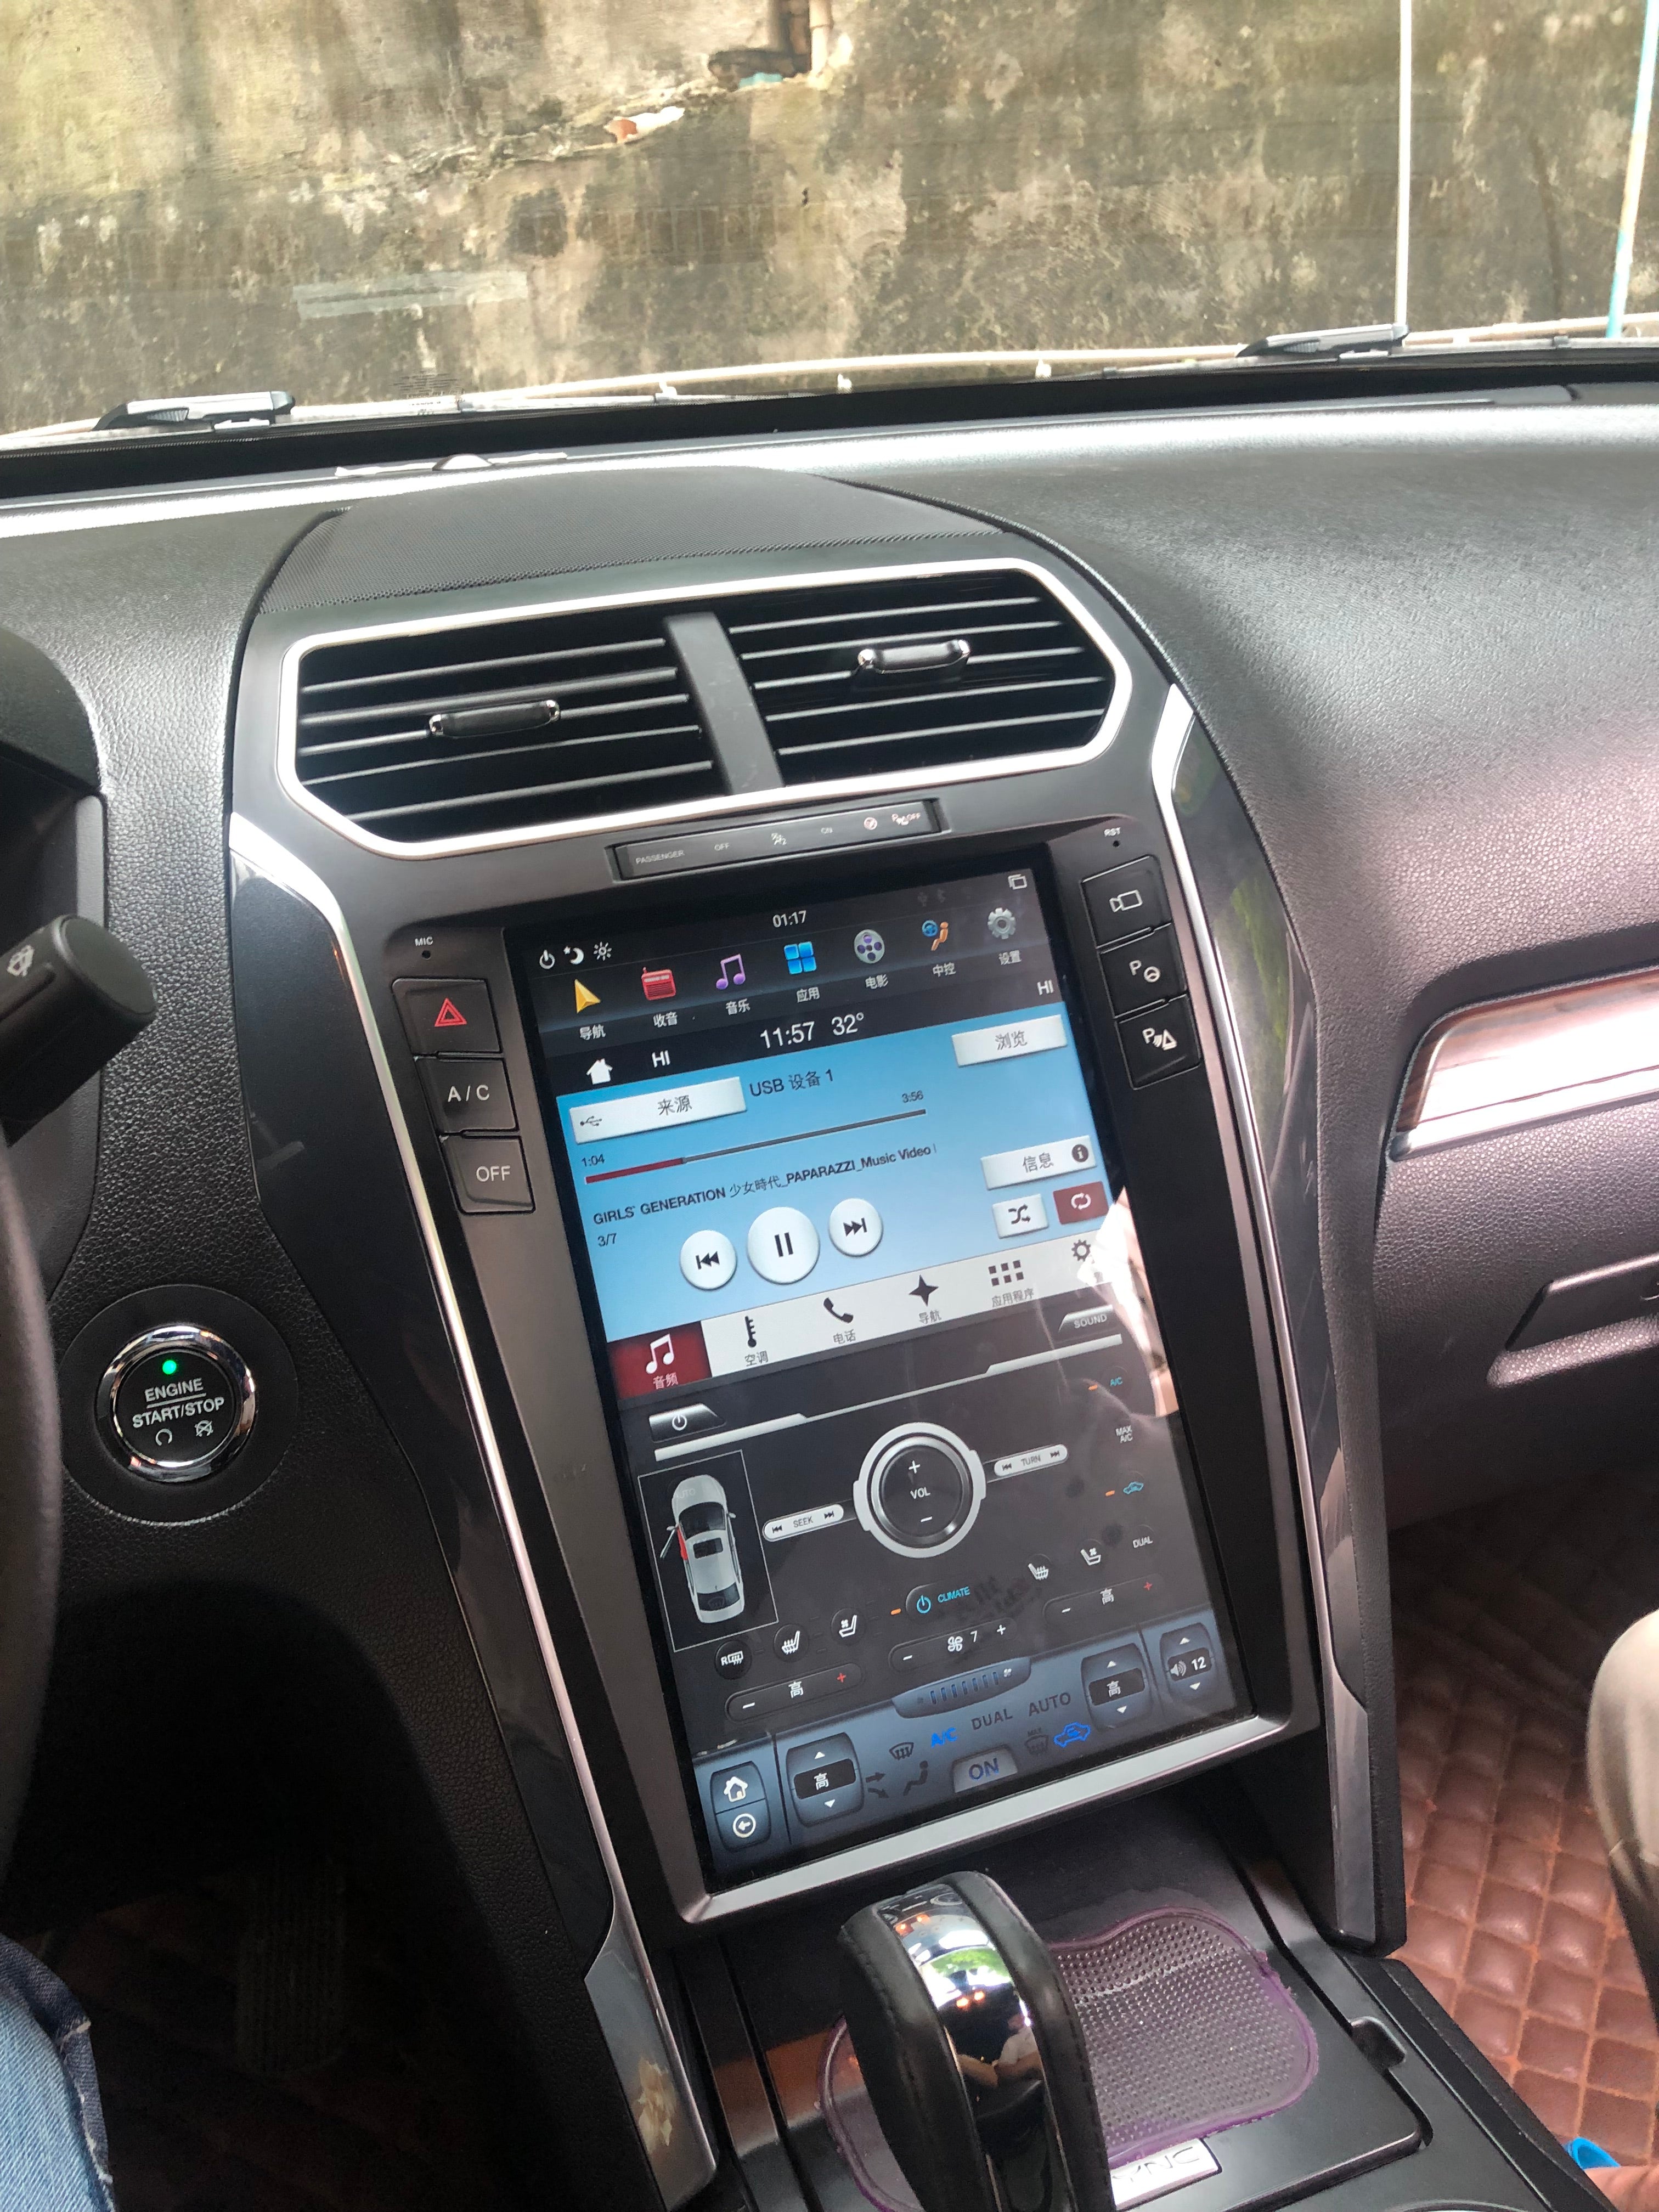 Ford Explorer 2011 - 2018 12.1" Vertical Screen Android Radio Tesla Style with SYNC 2 and SYNC 3 Retaiend